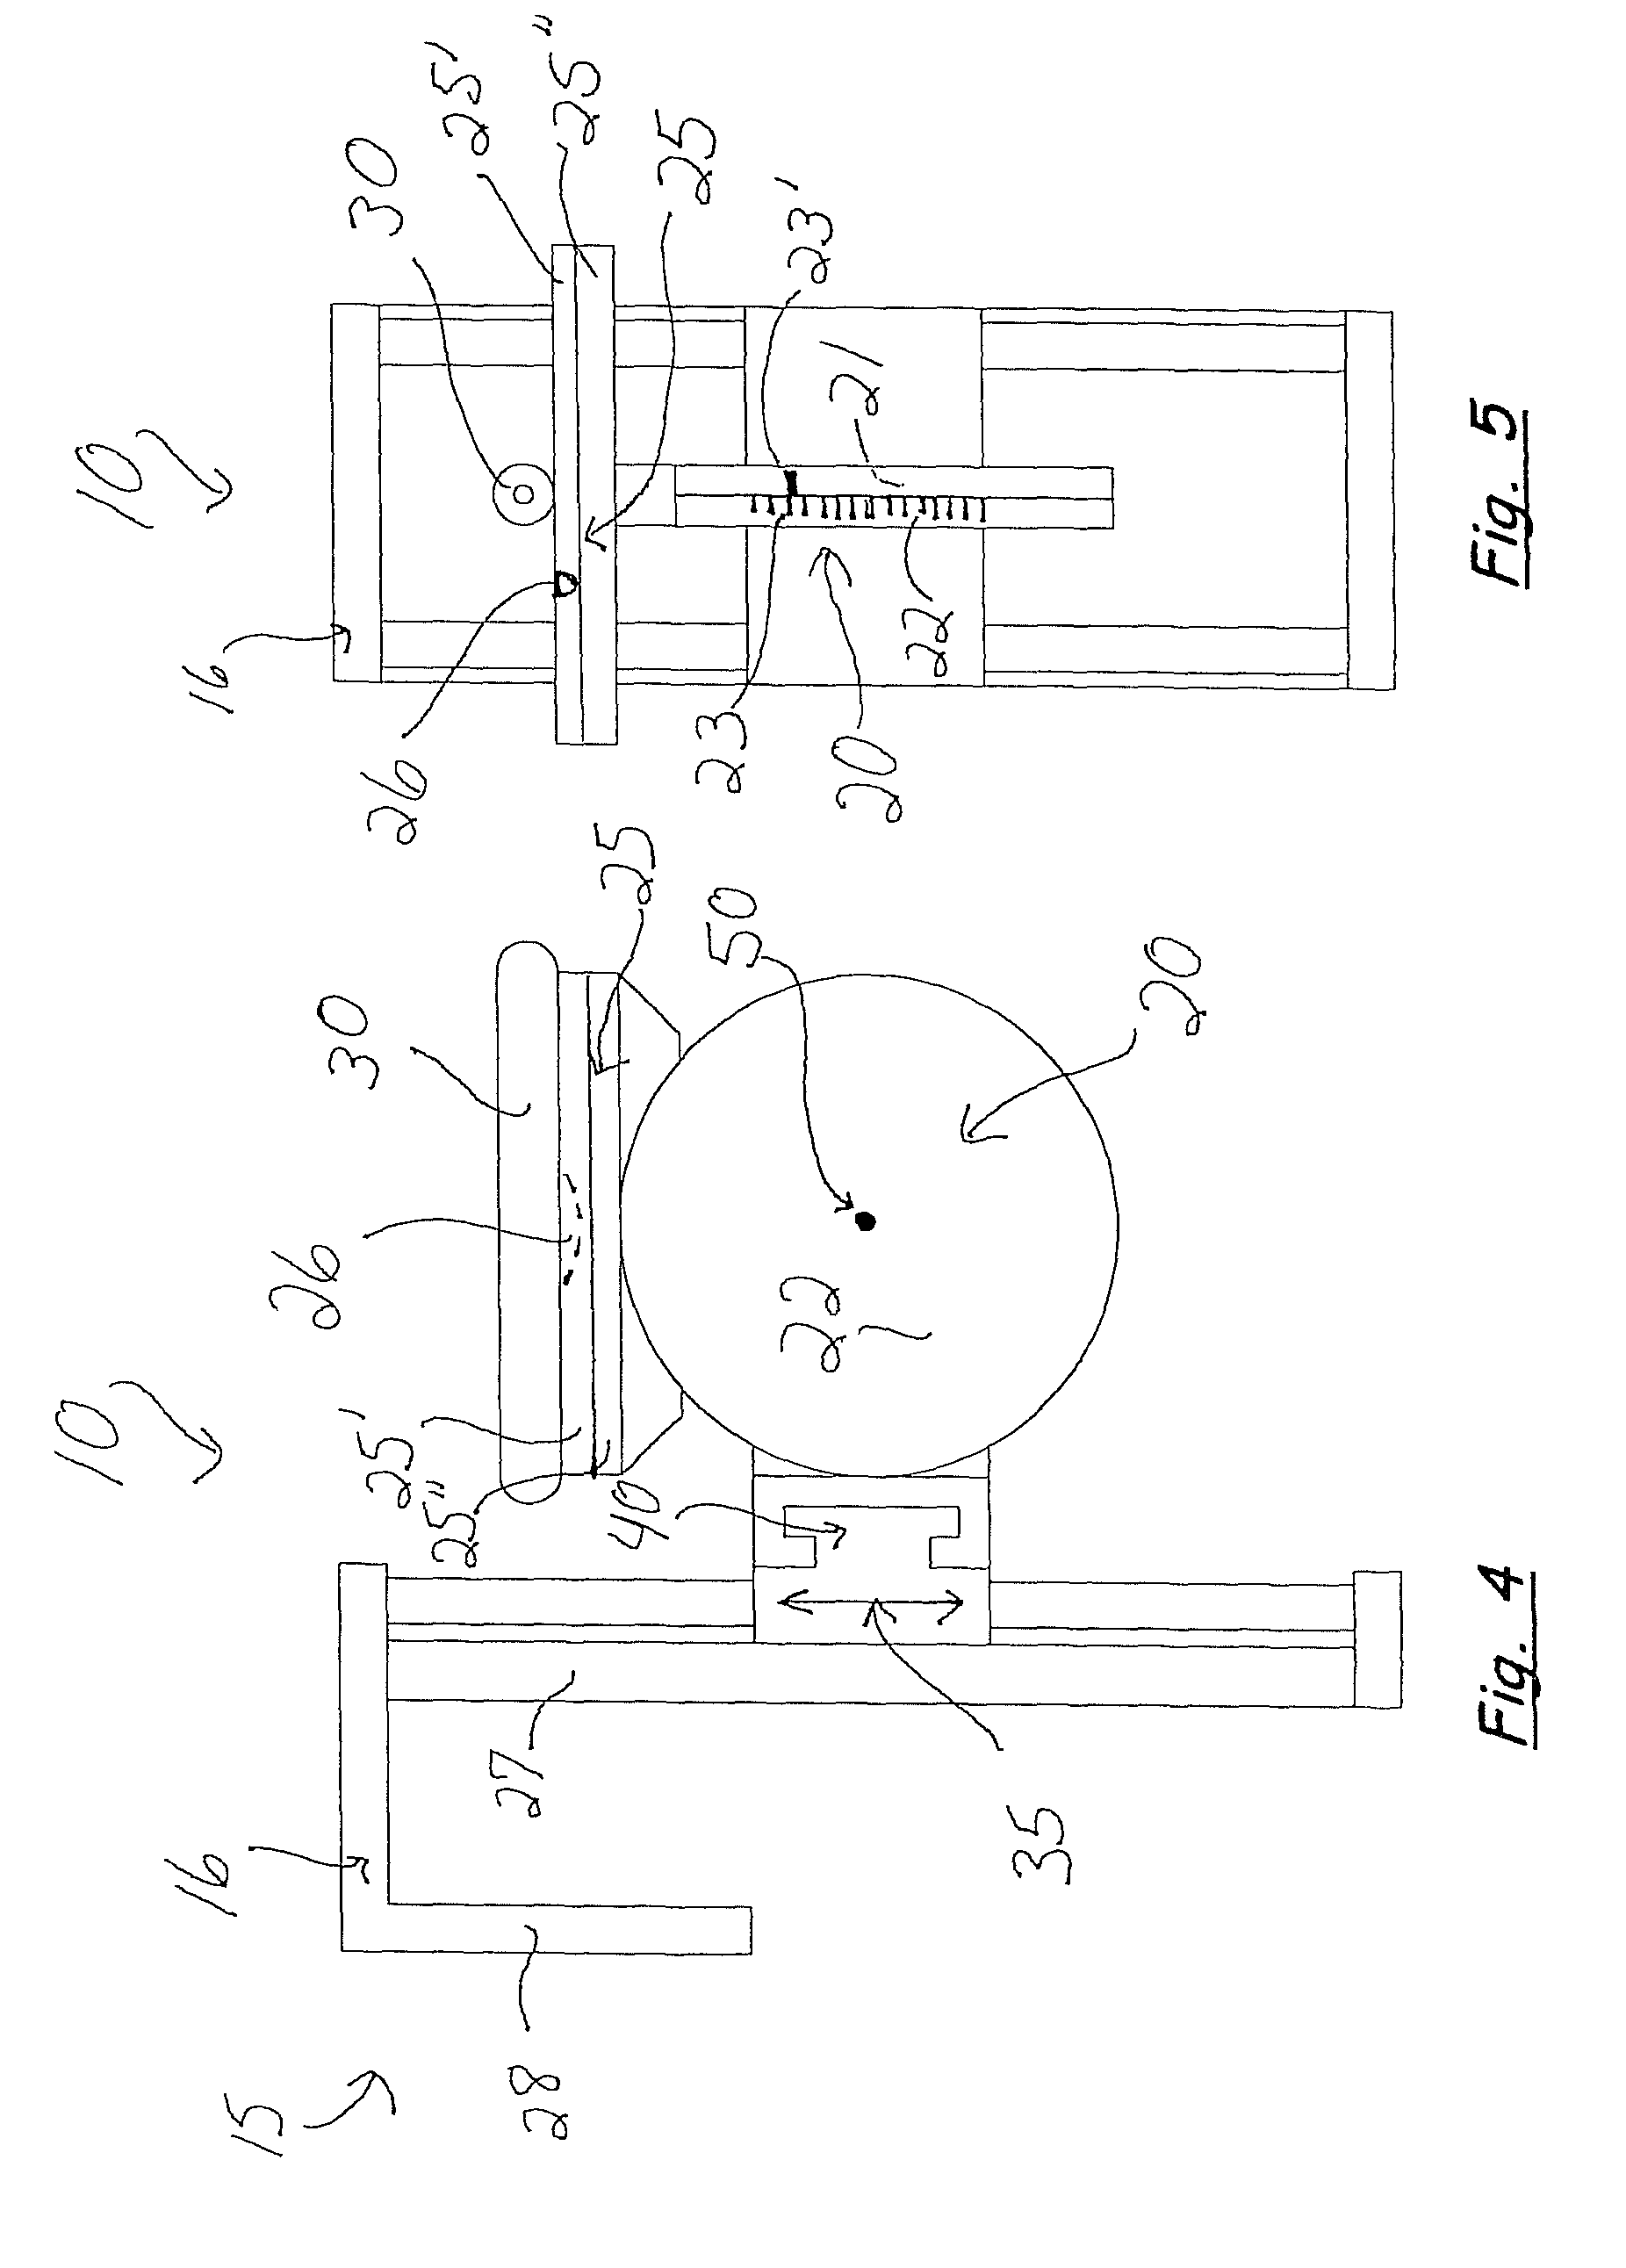 Building frame construction tools and methods using laser alignment